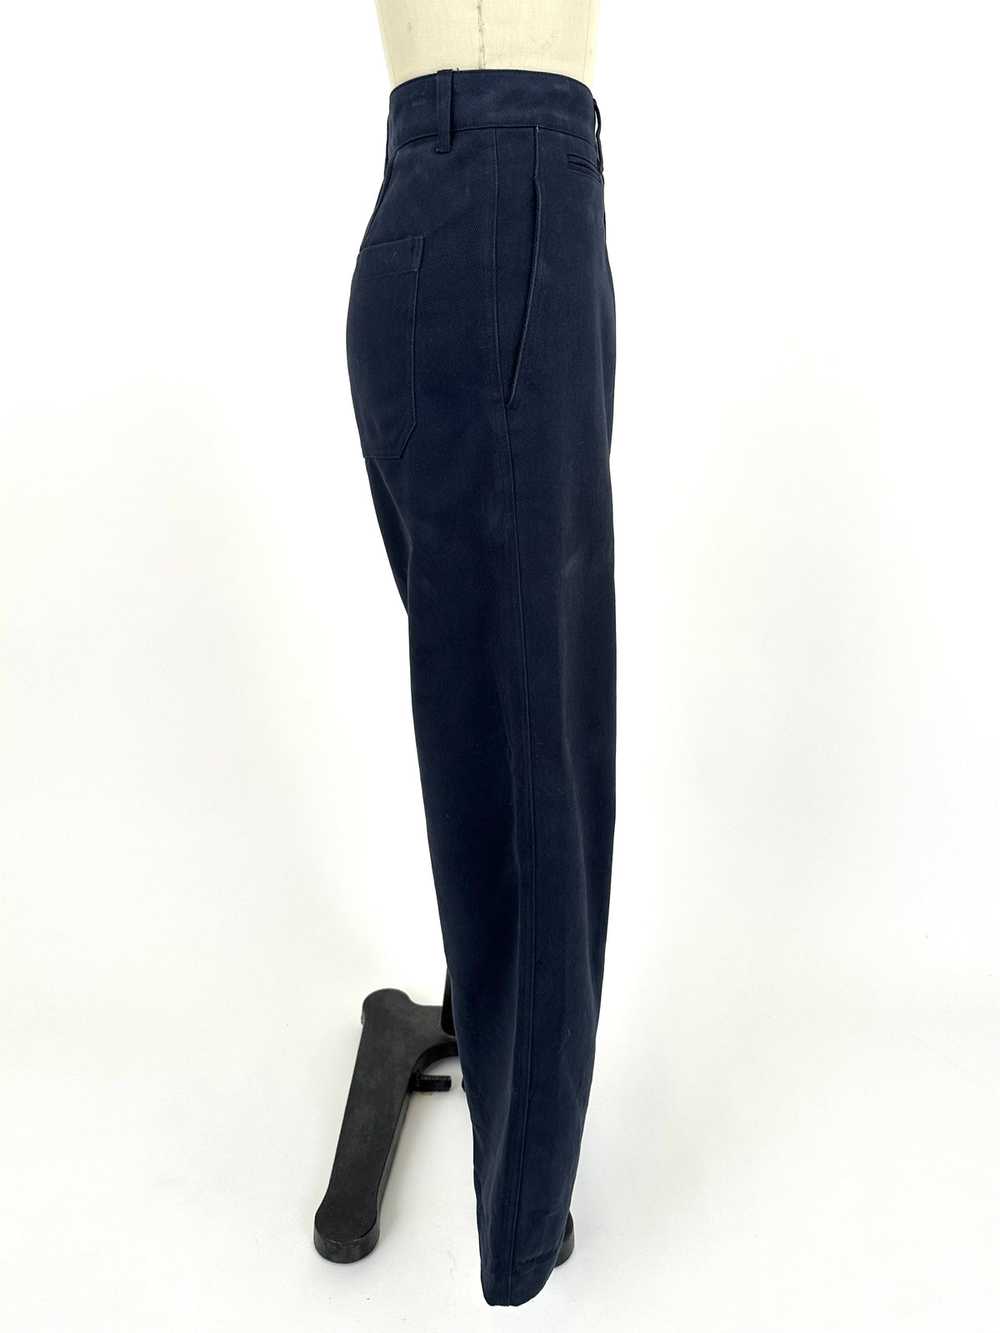 Girls of Dust Brushed Twill Trousers - image 3